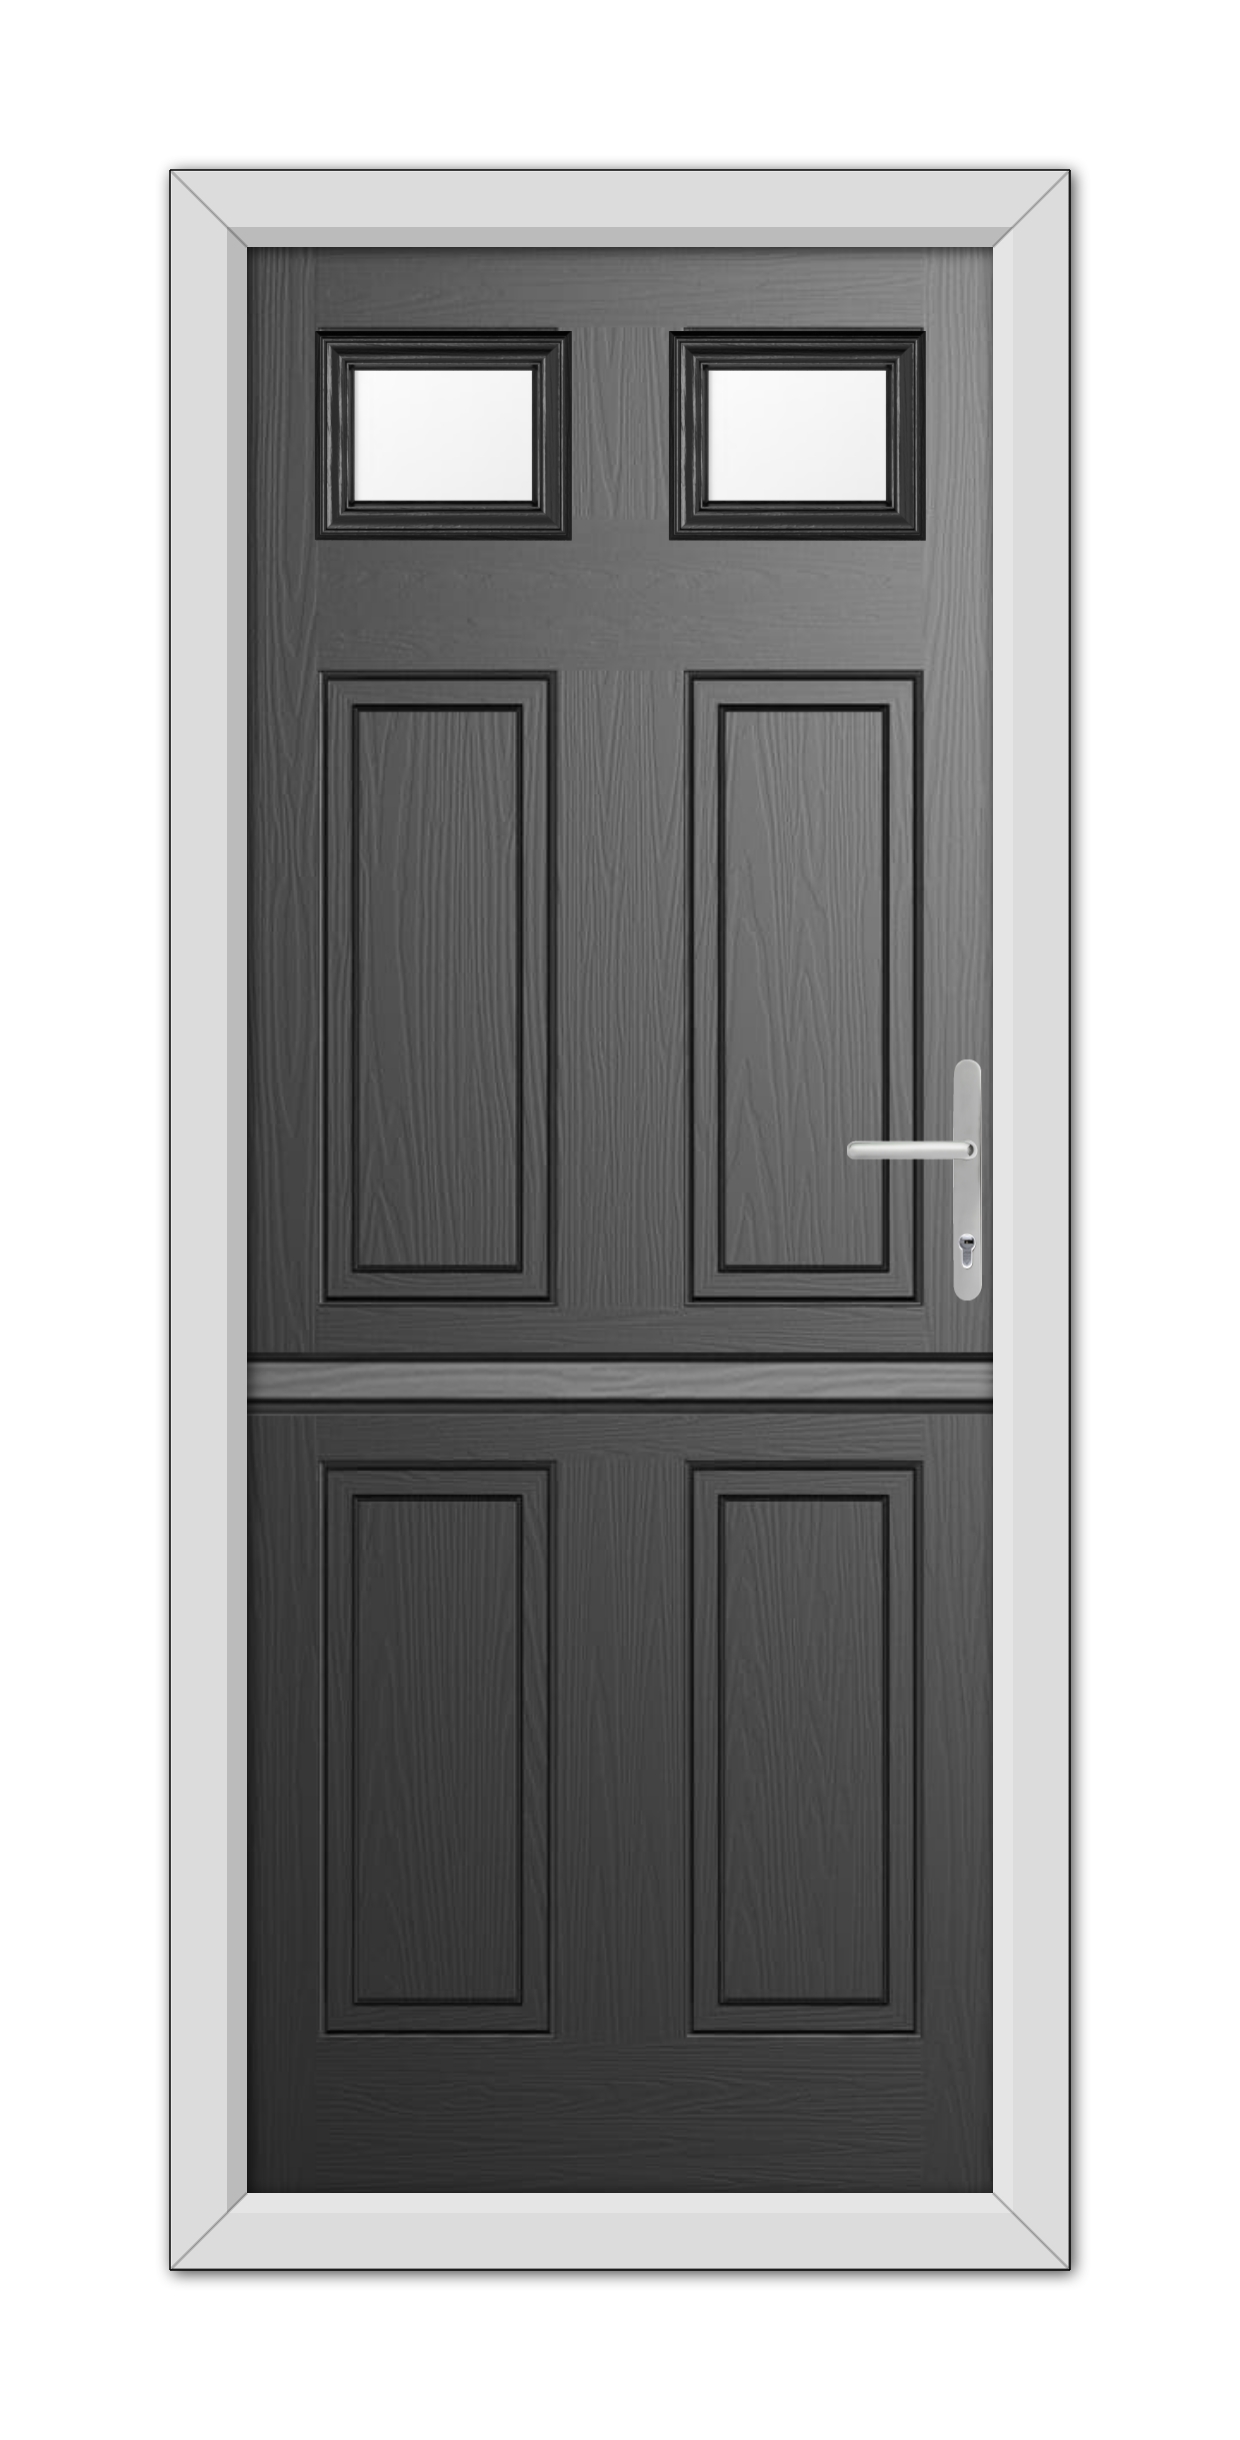 A modern Black Middleton Glazed 2 Stable Composite Door with a silver handle and three square windows set in a white frame.